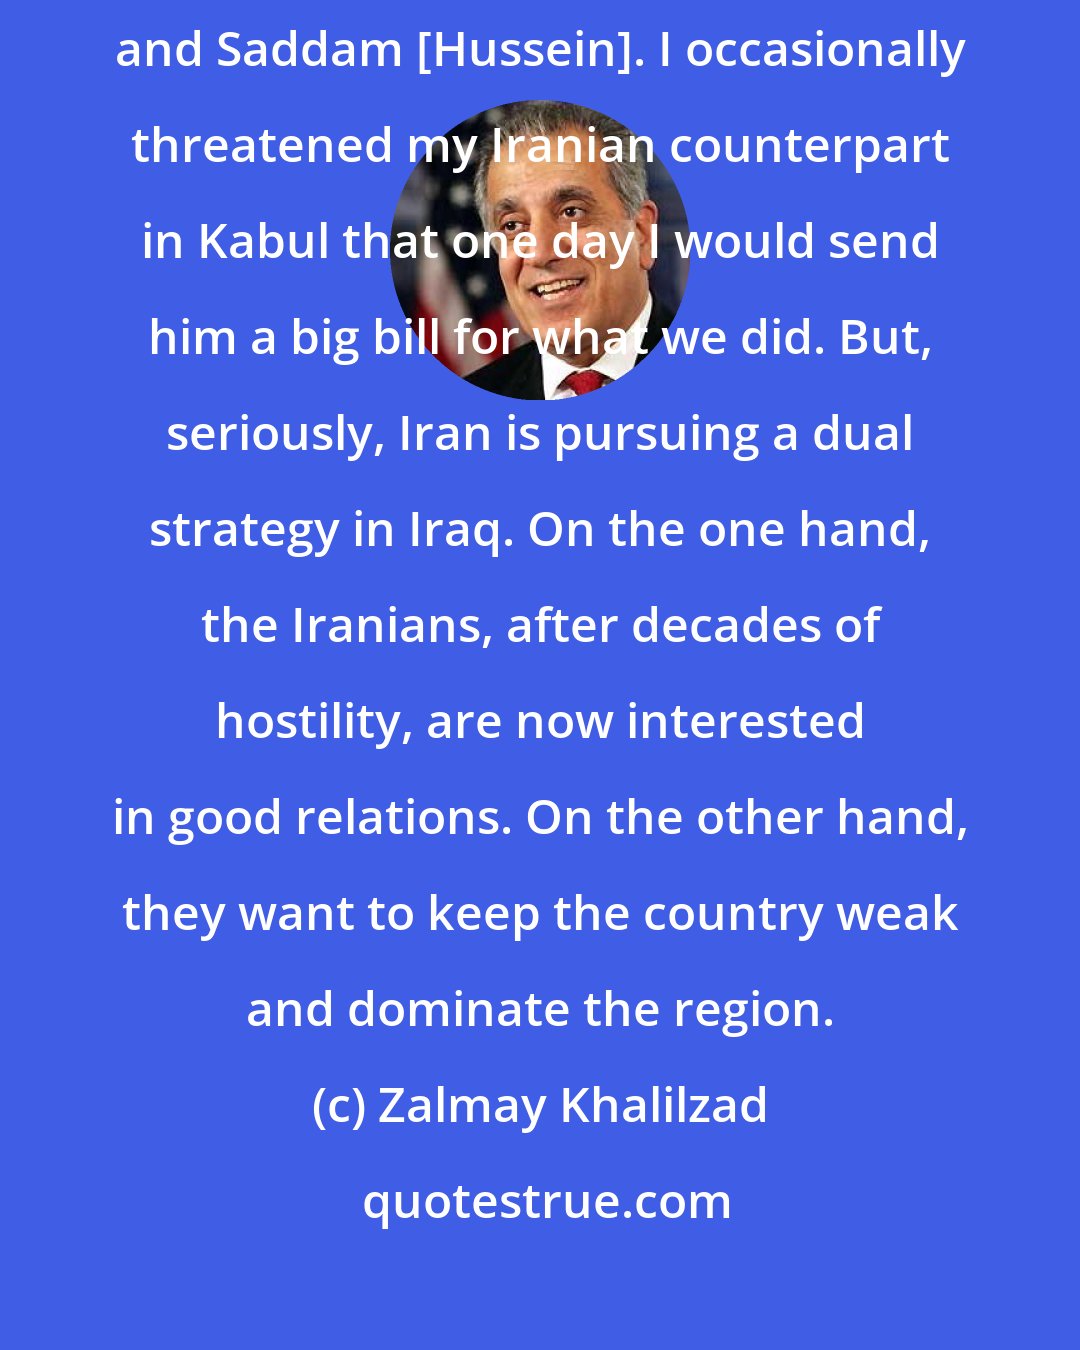 Zalmay Khalilzad: Americans have eliminated Iran's worst enemies, the Taliban in Afghanistan and Saddam [Hussein]. I occasionally threatened my Iranian counterpart in Kabul that one day I would send him a big bill for what we did. But, seriously, Iran is pursuing a dual strategy in Iraq. On the one hand, the Iranians, after decades of hostility, are now interested in good relations. On the other hand, they want to keep the country weak and dominate the region.